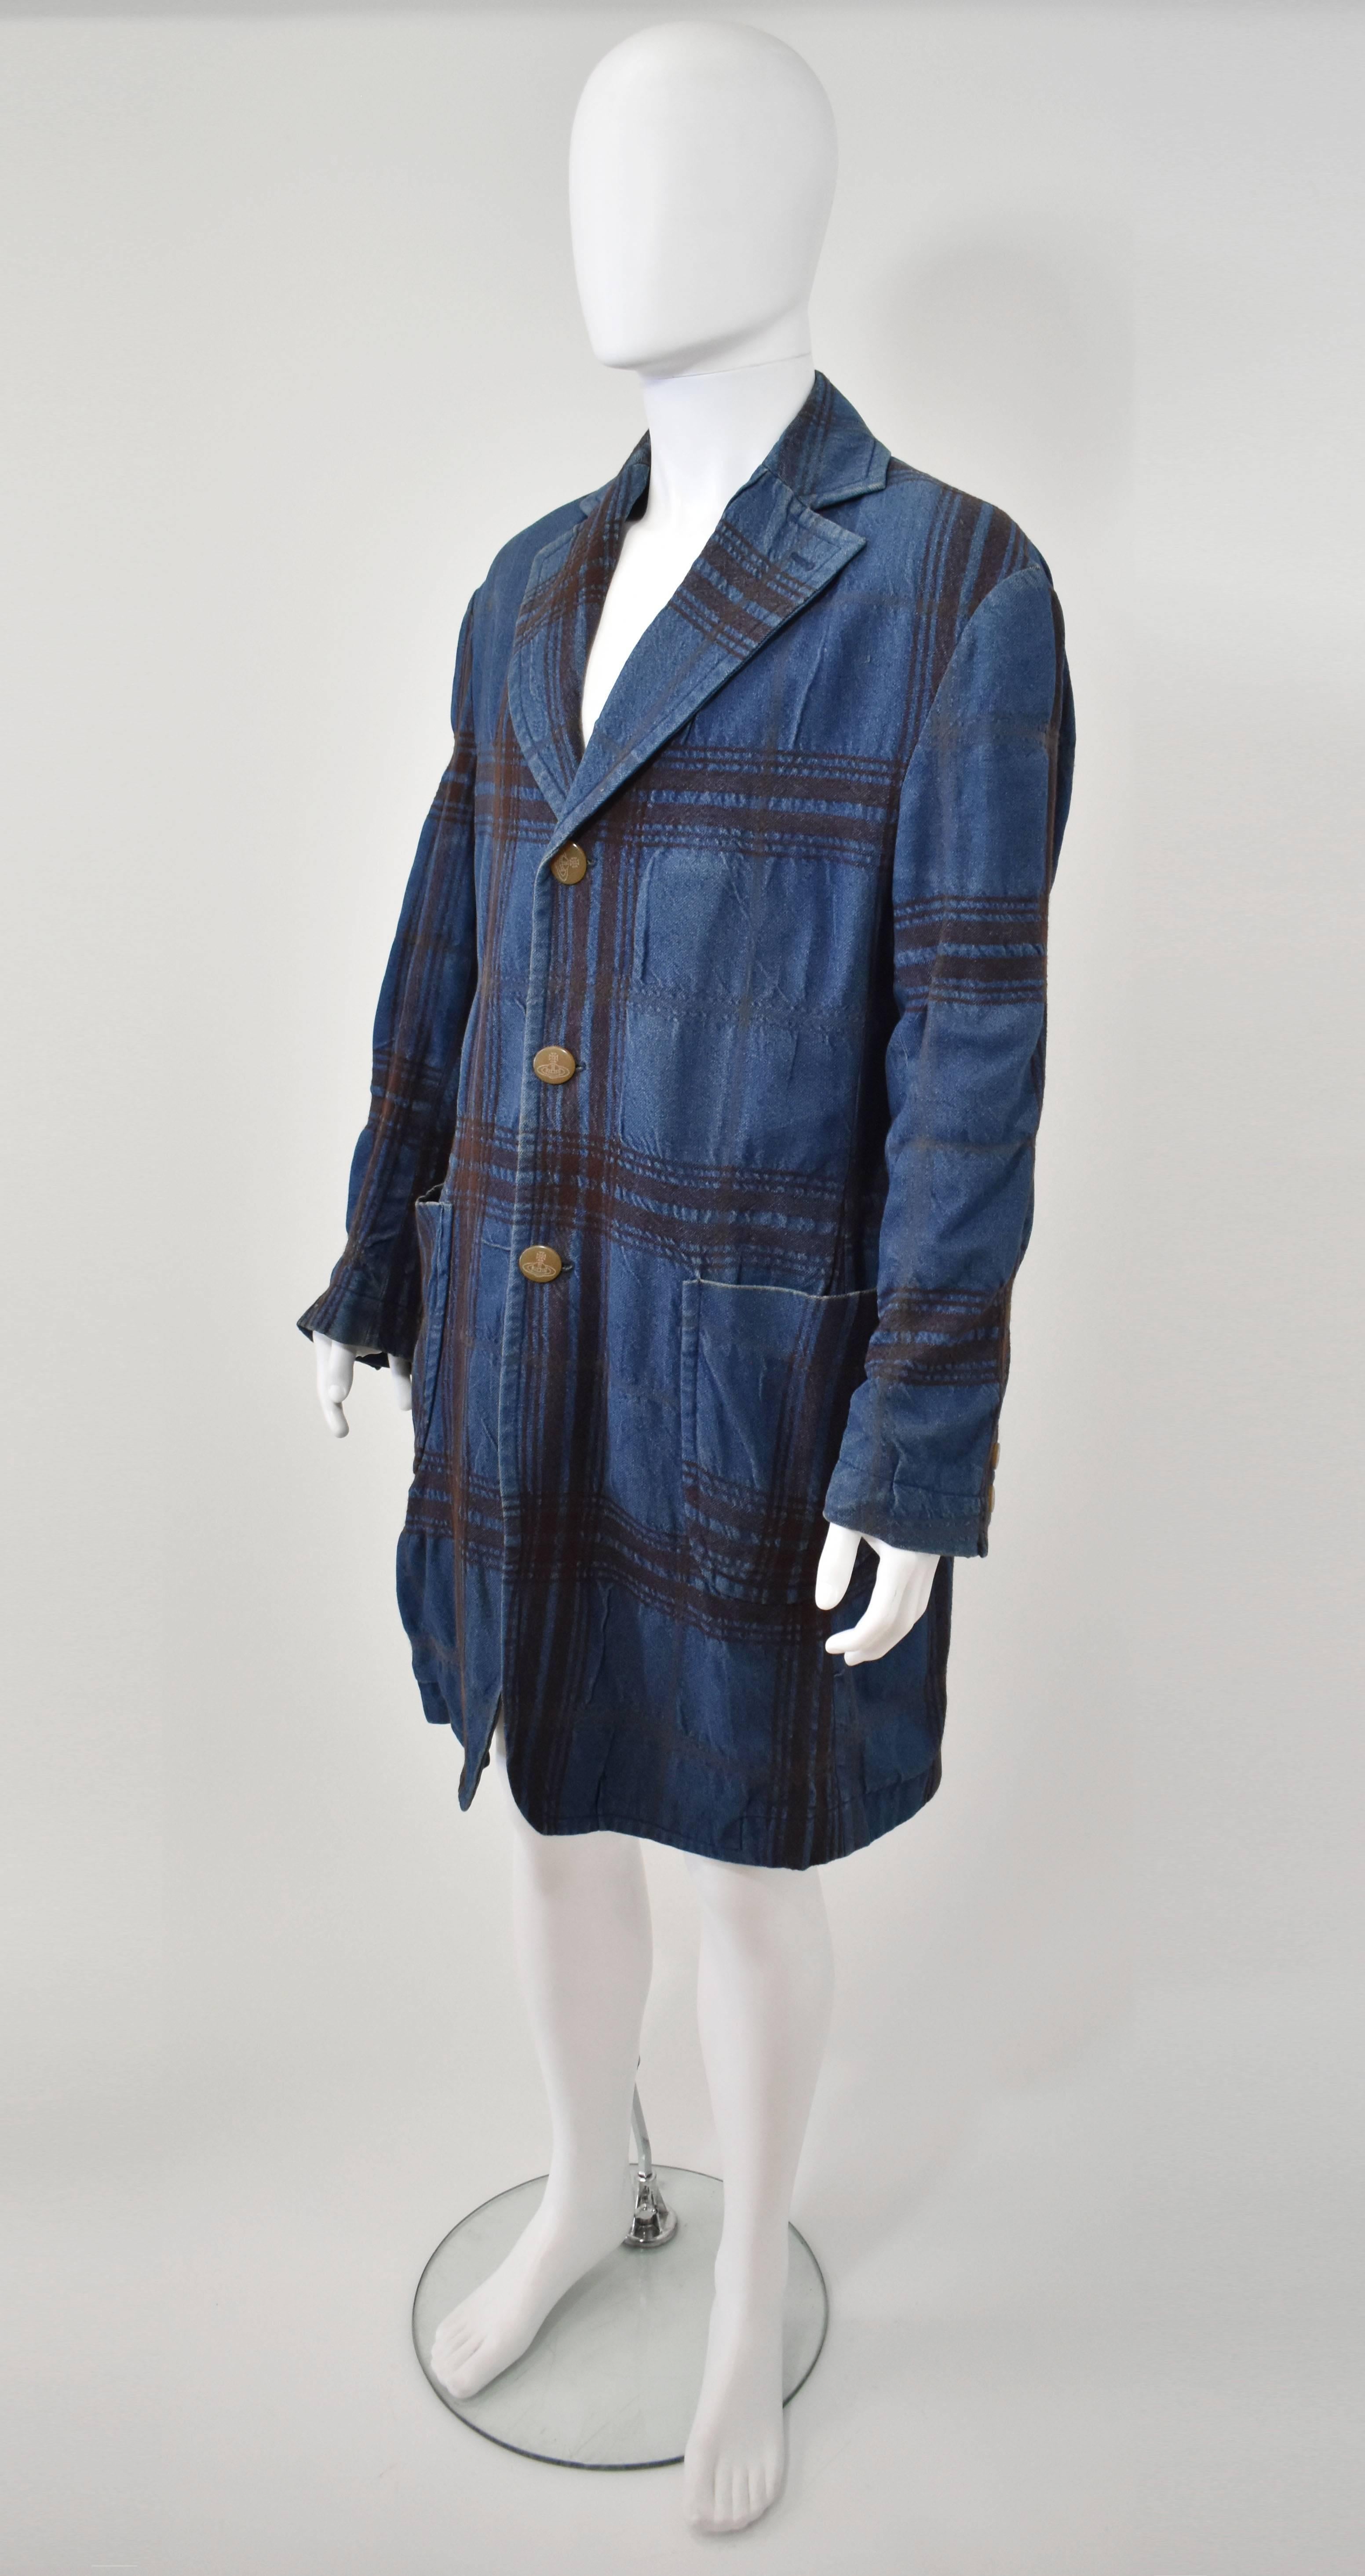 A denim and brown check wool coat with large round pockets by Vivienne Westwood. In excellent condition. 

Length - 43
Bust - 47
Waist - 44
Hips - 47
Sleeve Length - 26.5
